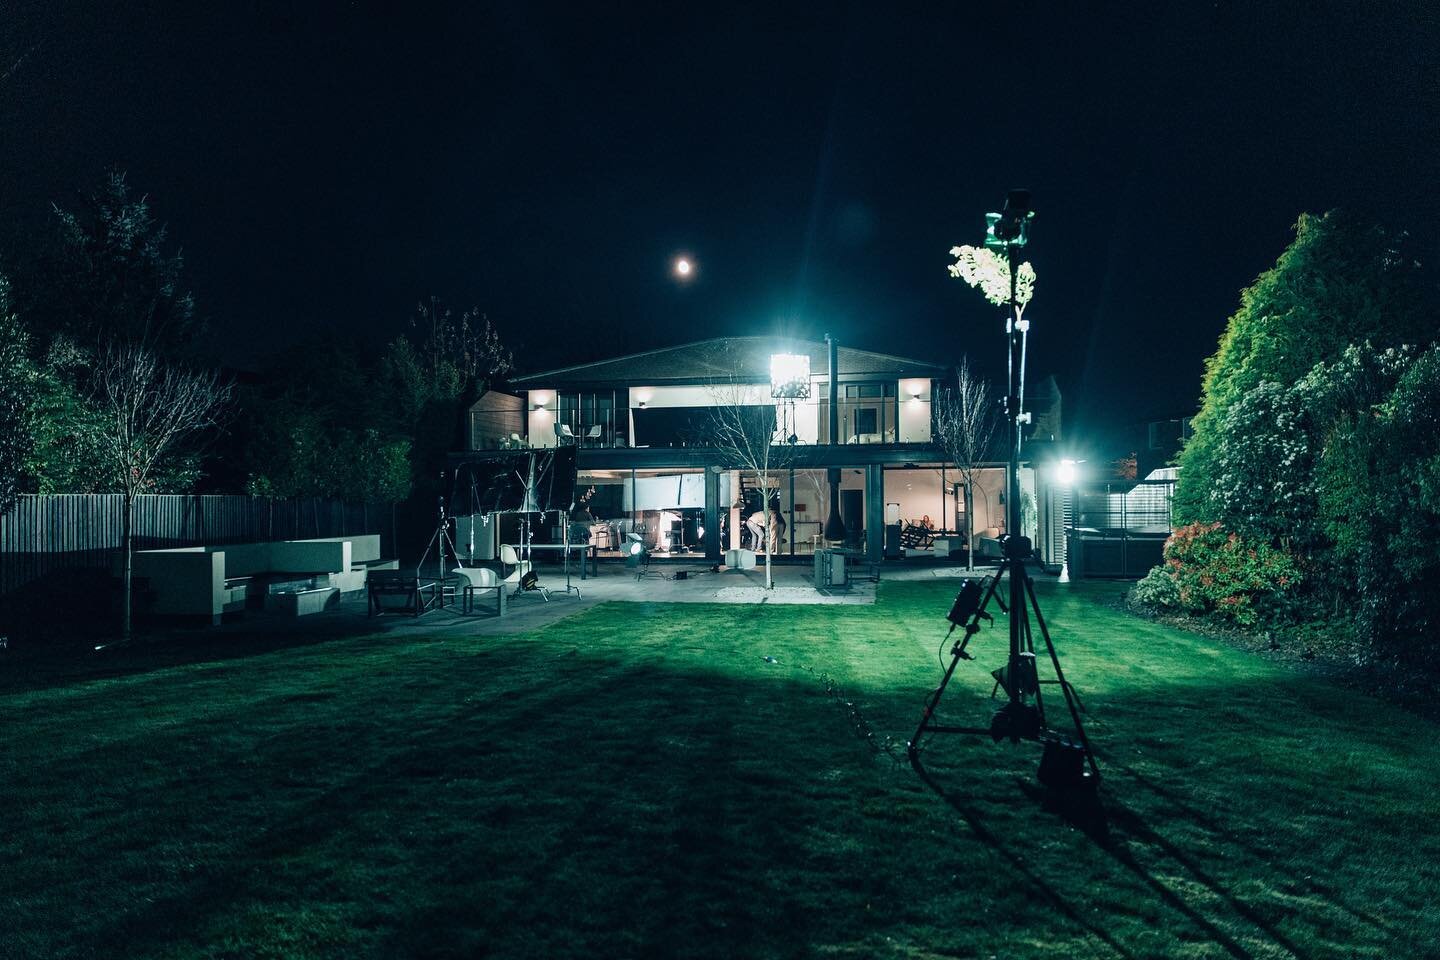 Bright lights 💡and late nights 🌙 shifting between day and night shifts is commonplace when working #onset🎥🎬 but it ain&rsquo;t half fun doing what we do 🙌 #setlife #nightshift #filming #onlocation